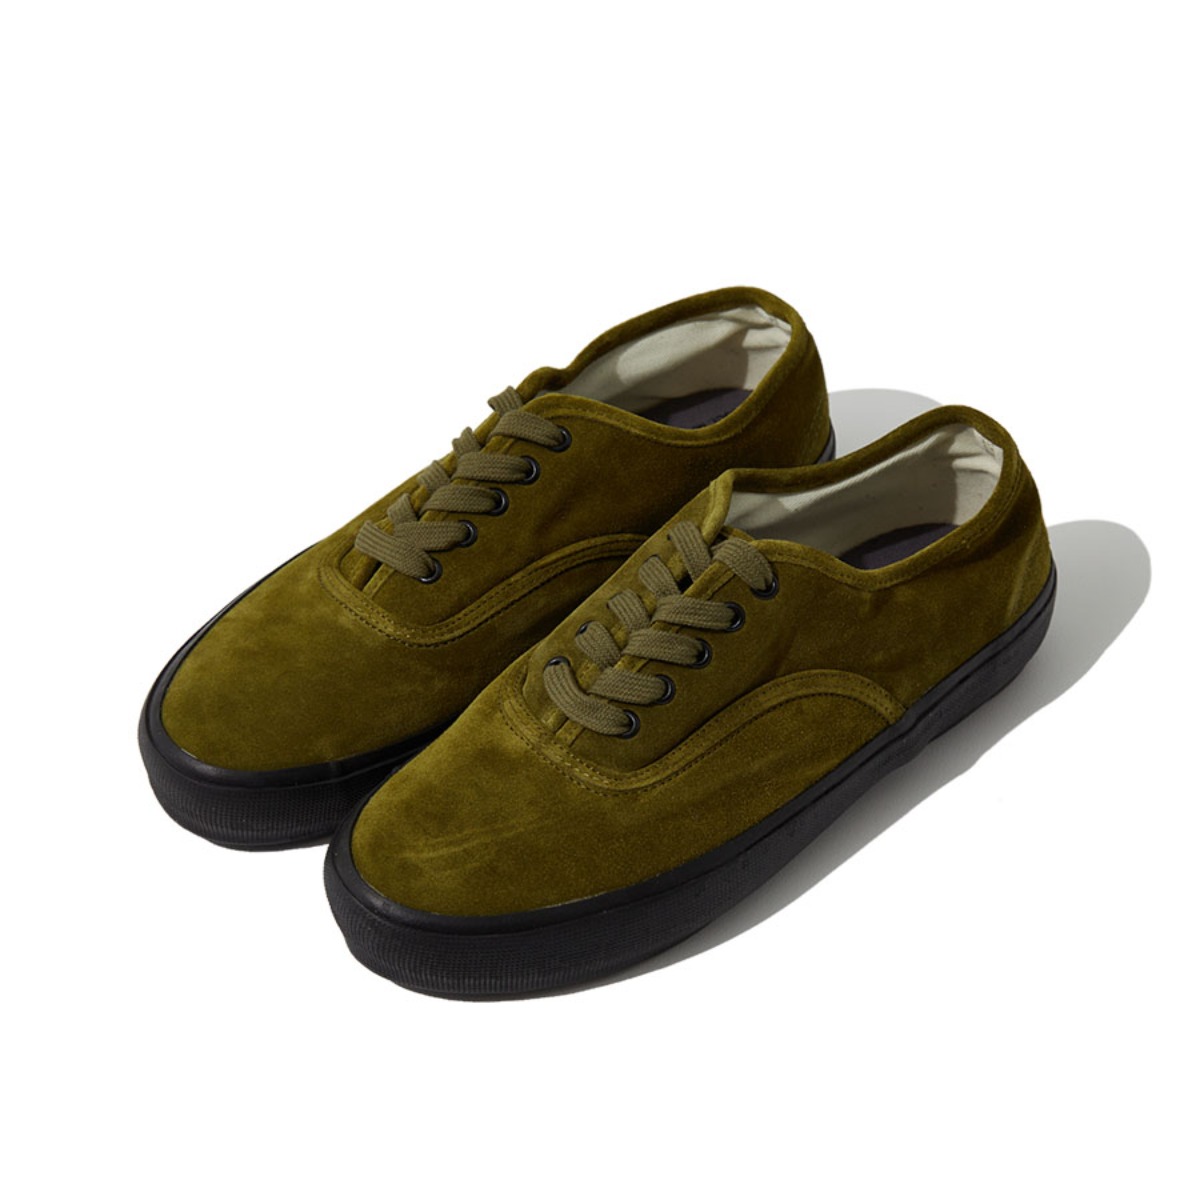 US NAVY MILITARY TRAINER 5851C (OLIVE SUEDE)